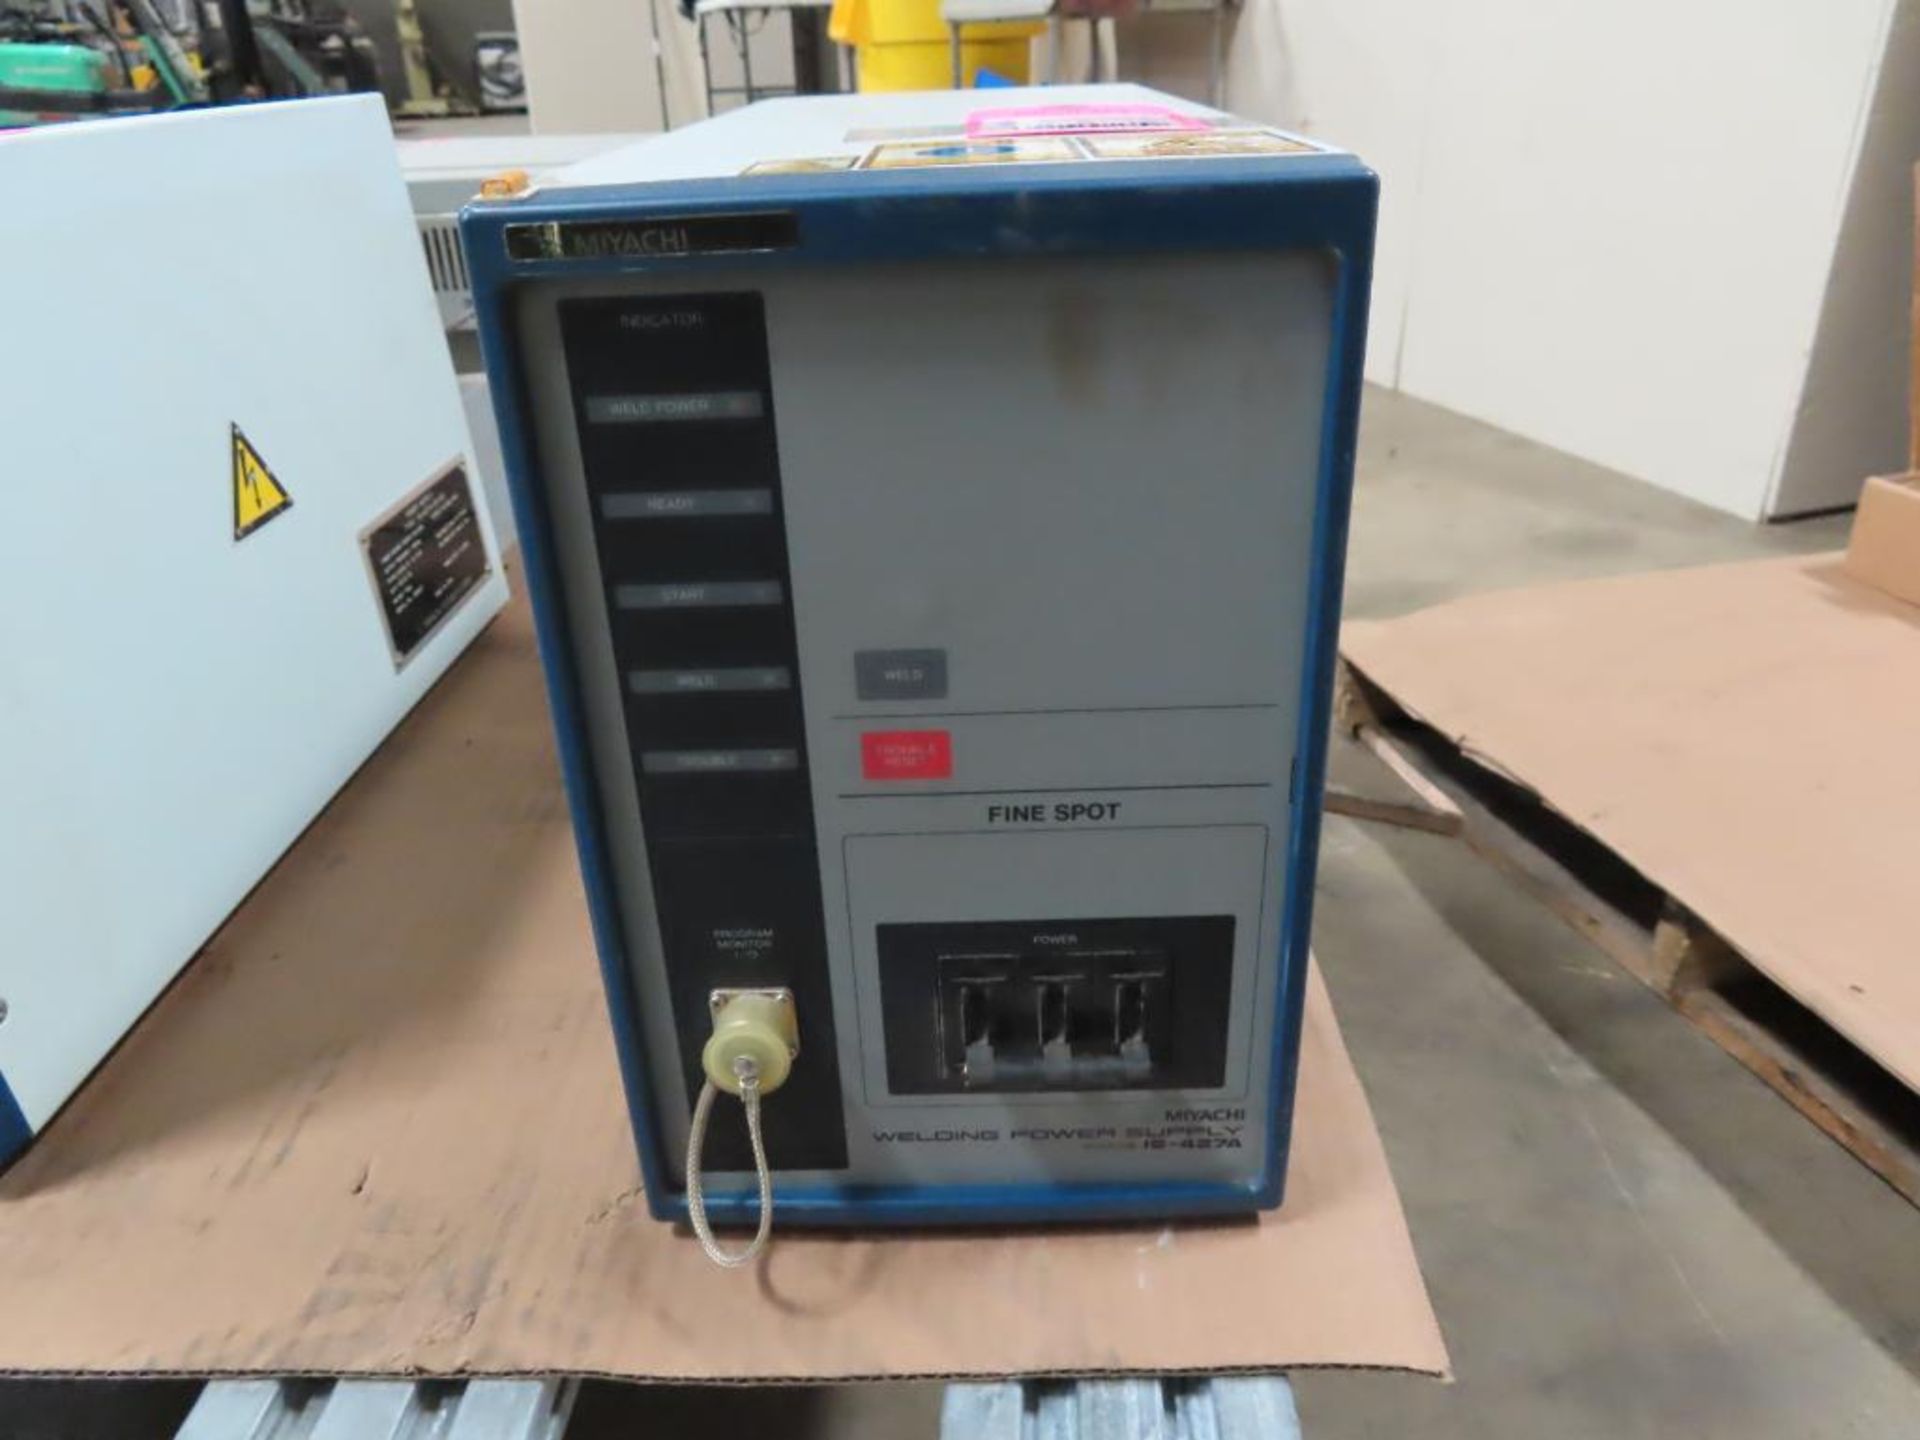 Miyachi Technos welding power supply type IS-427A-00-00, 27.1kVA max, 540v output. - Image 3 of 3